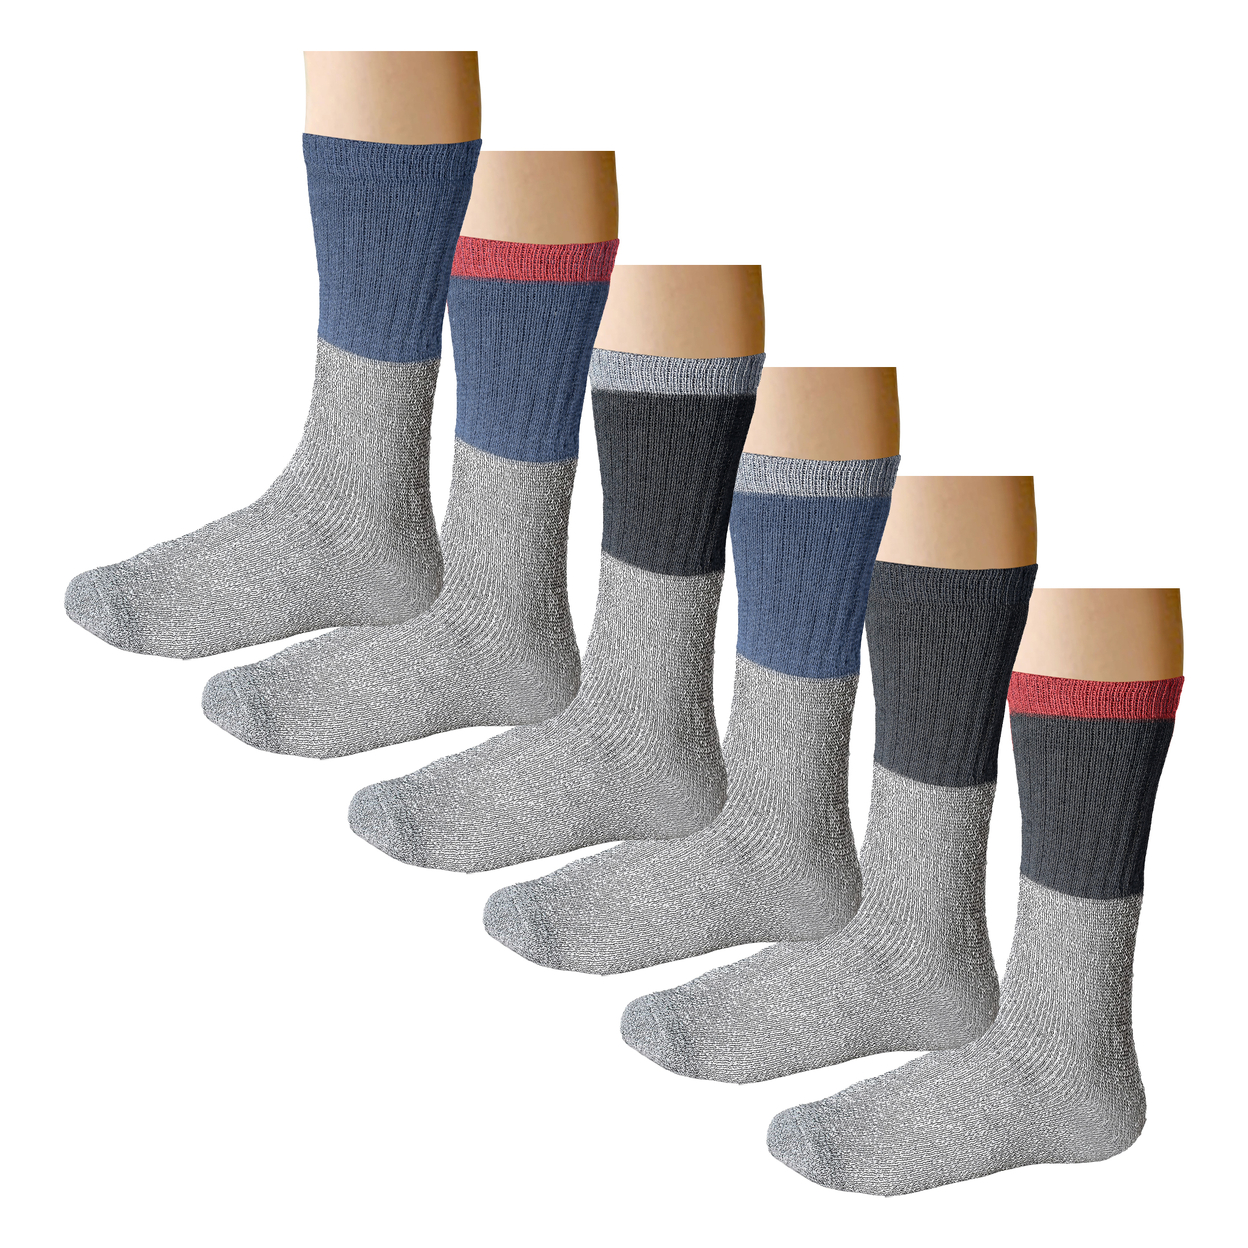 12-Pairs: Women's Winter Warm Thick Heated Cozy Thermal Crew Socks